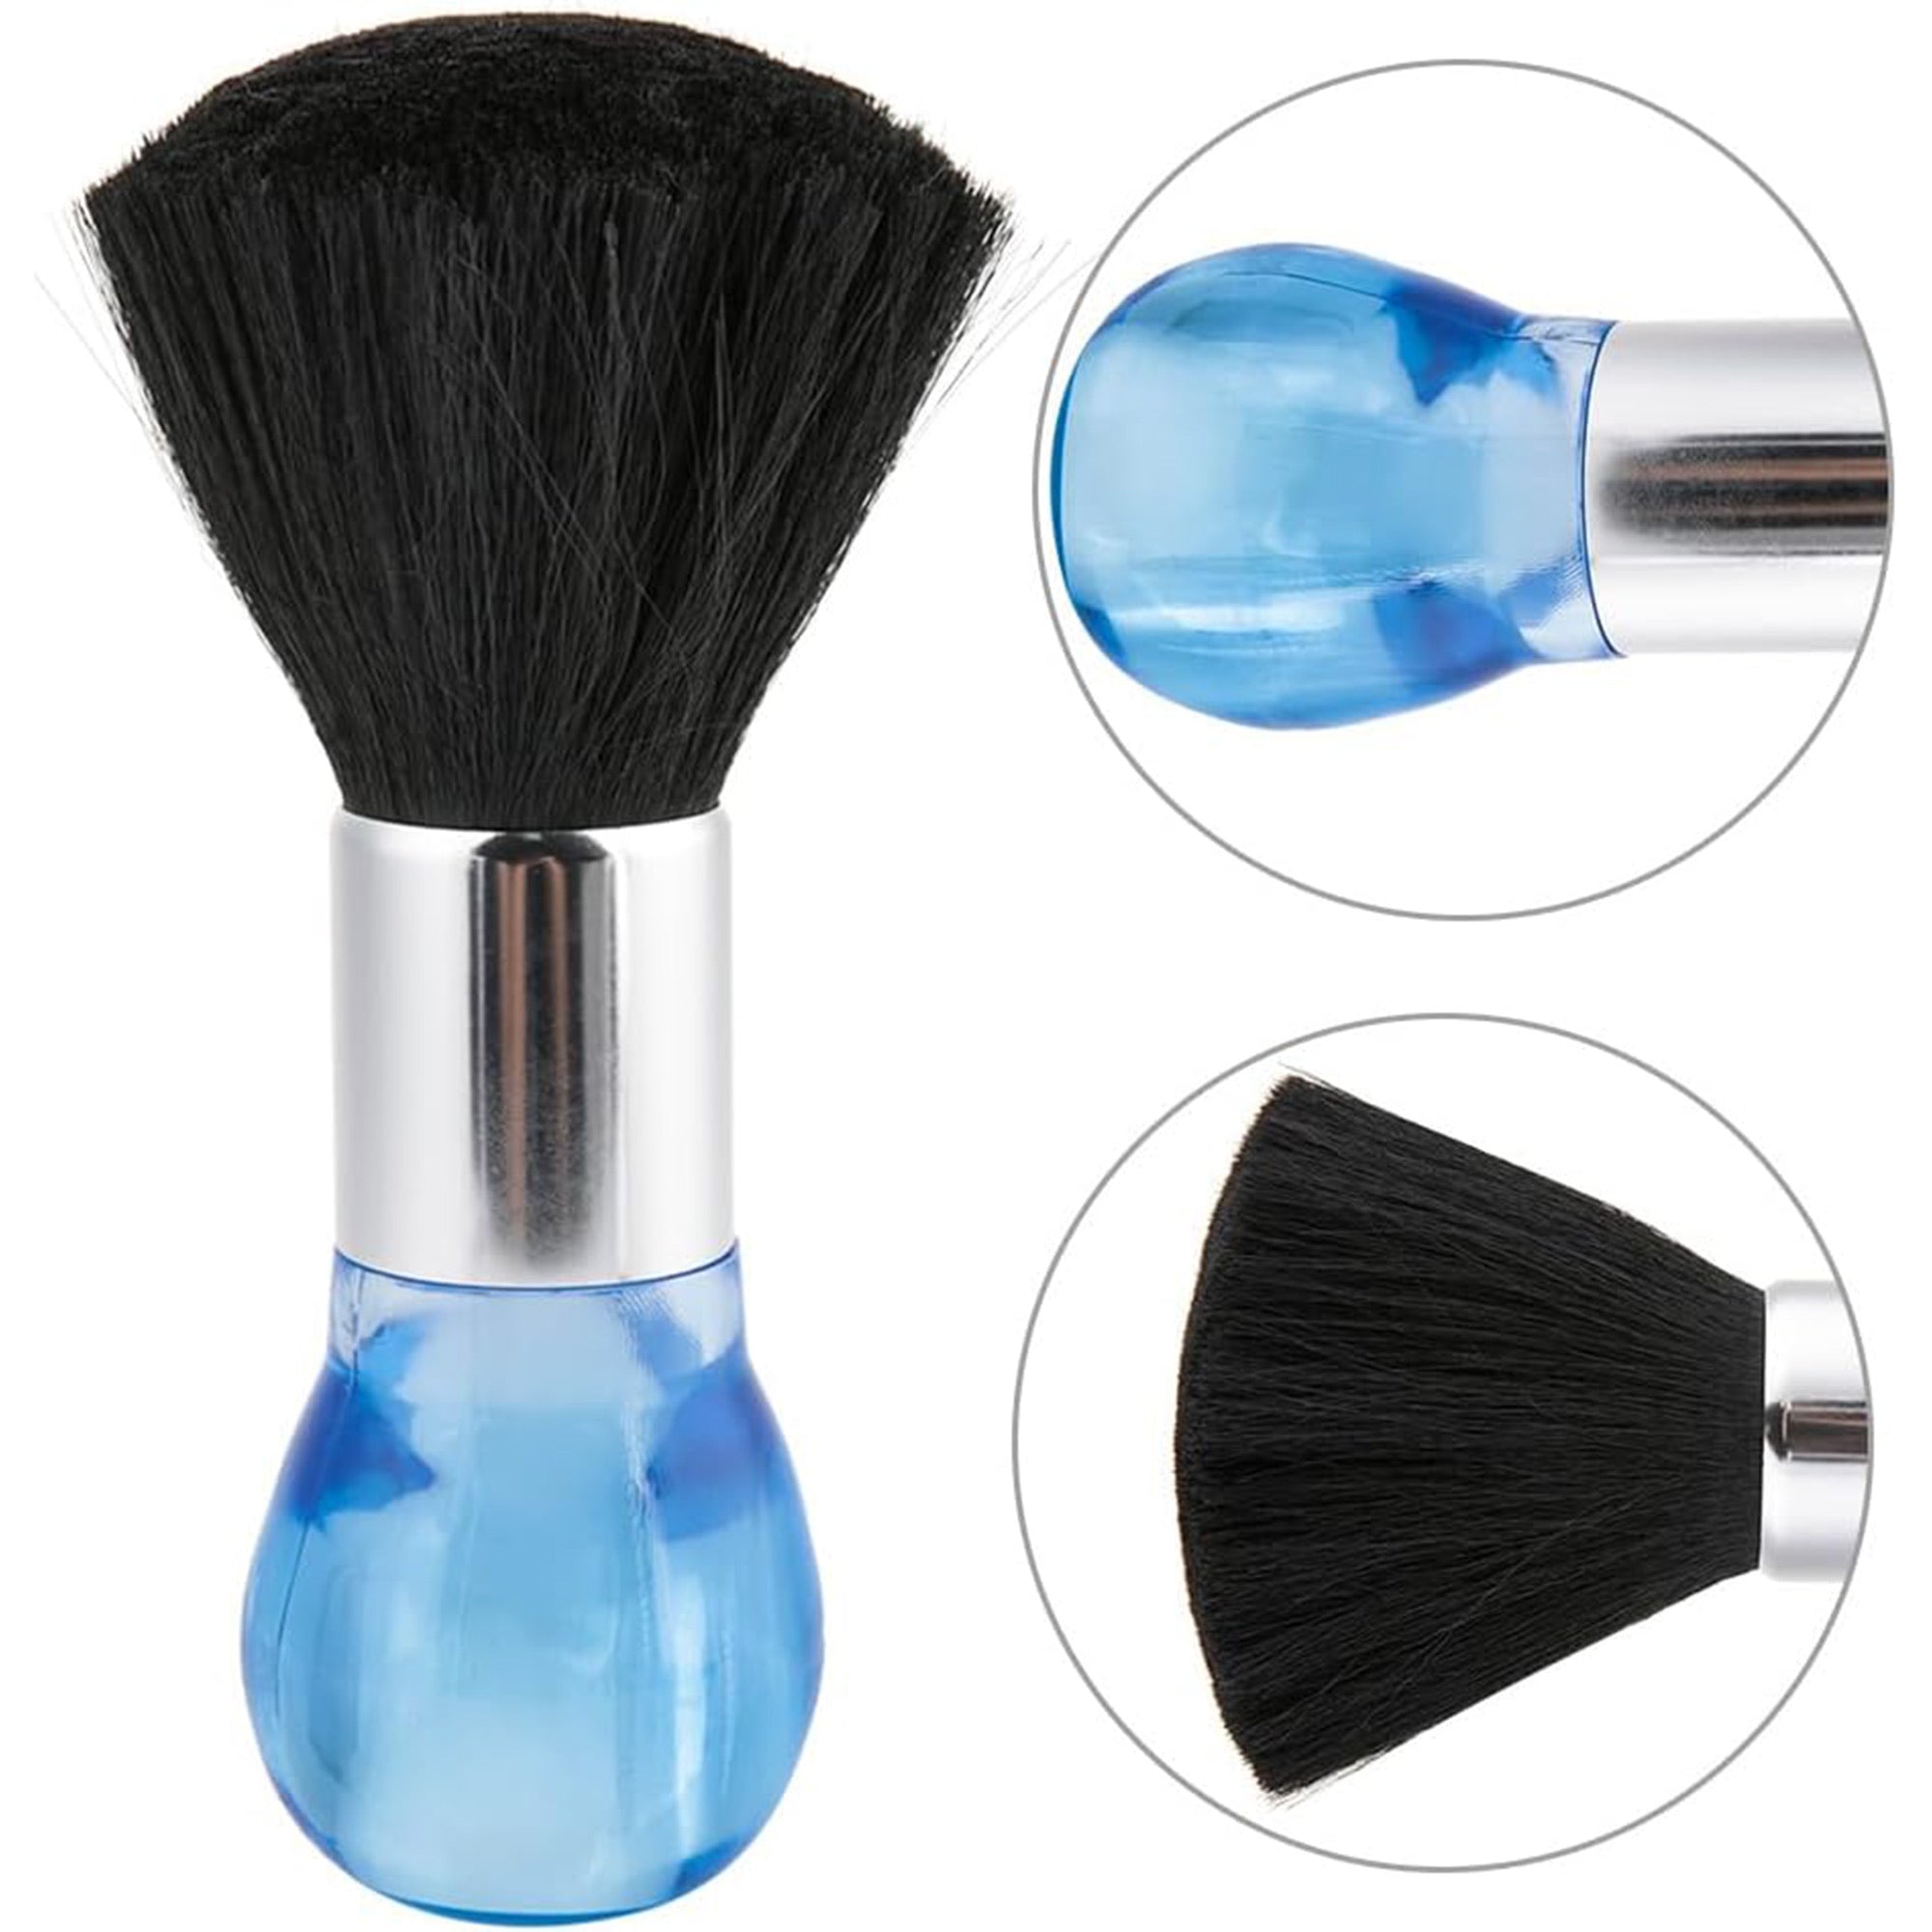 Eson - Neck Duster Brush Silver Metal Round Blue Handle 17x5cm - Eson Direct